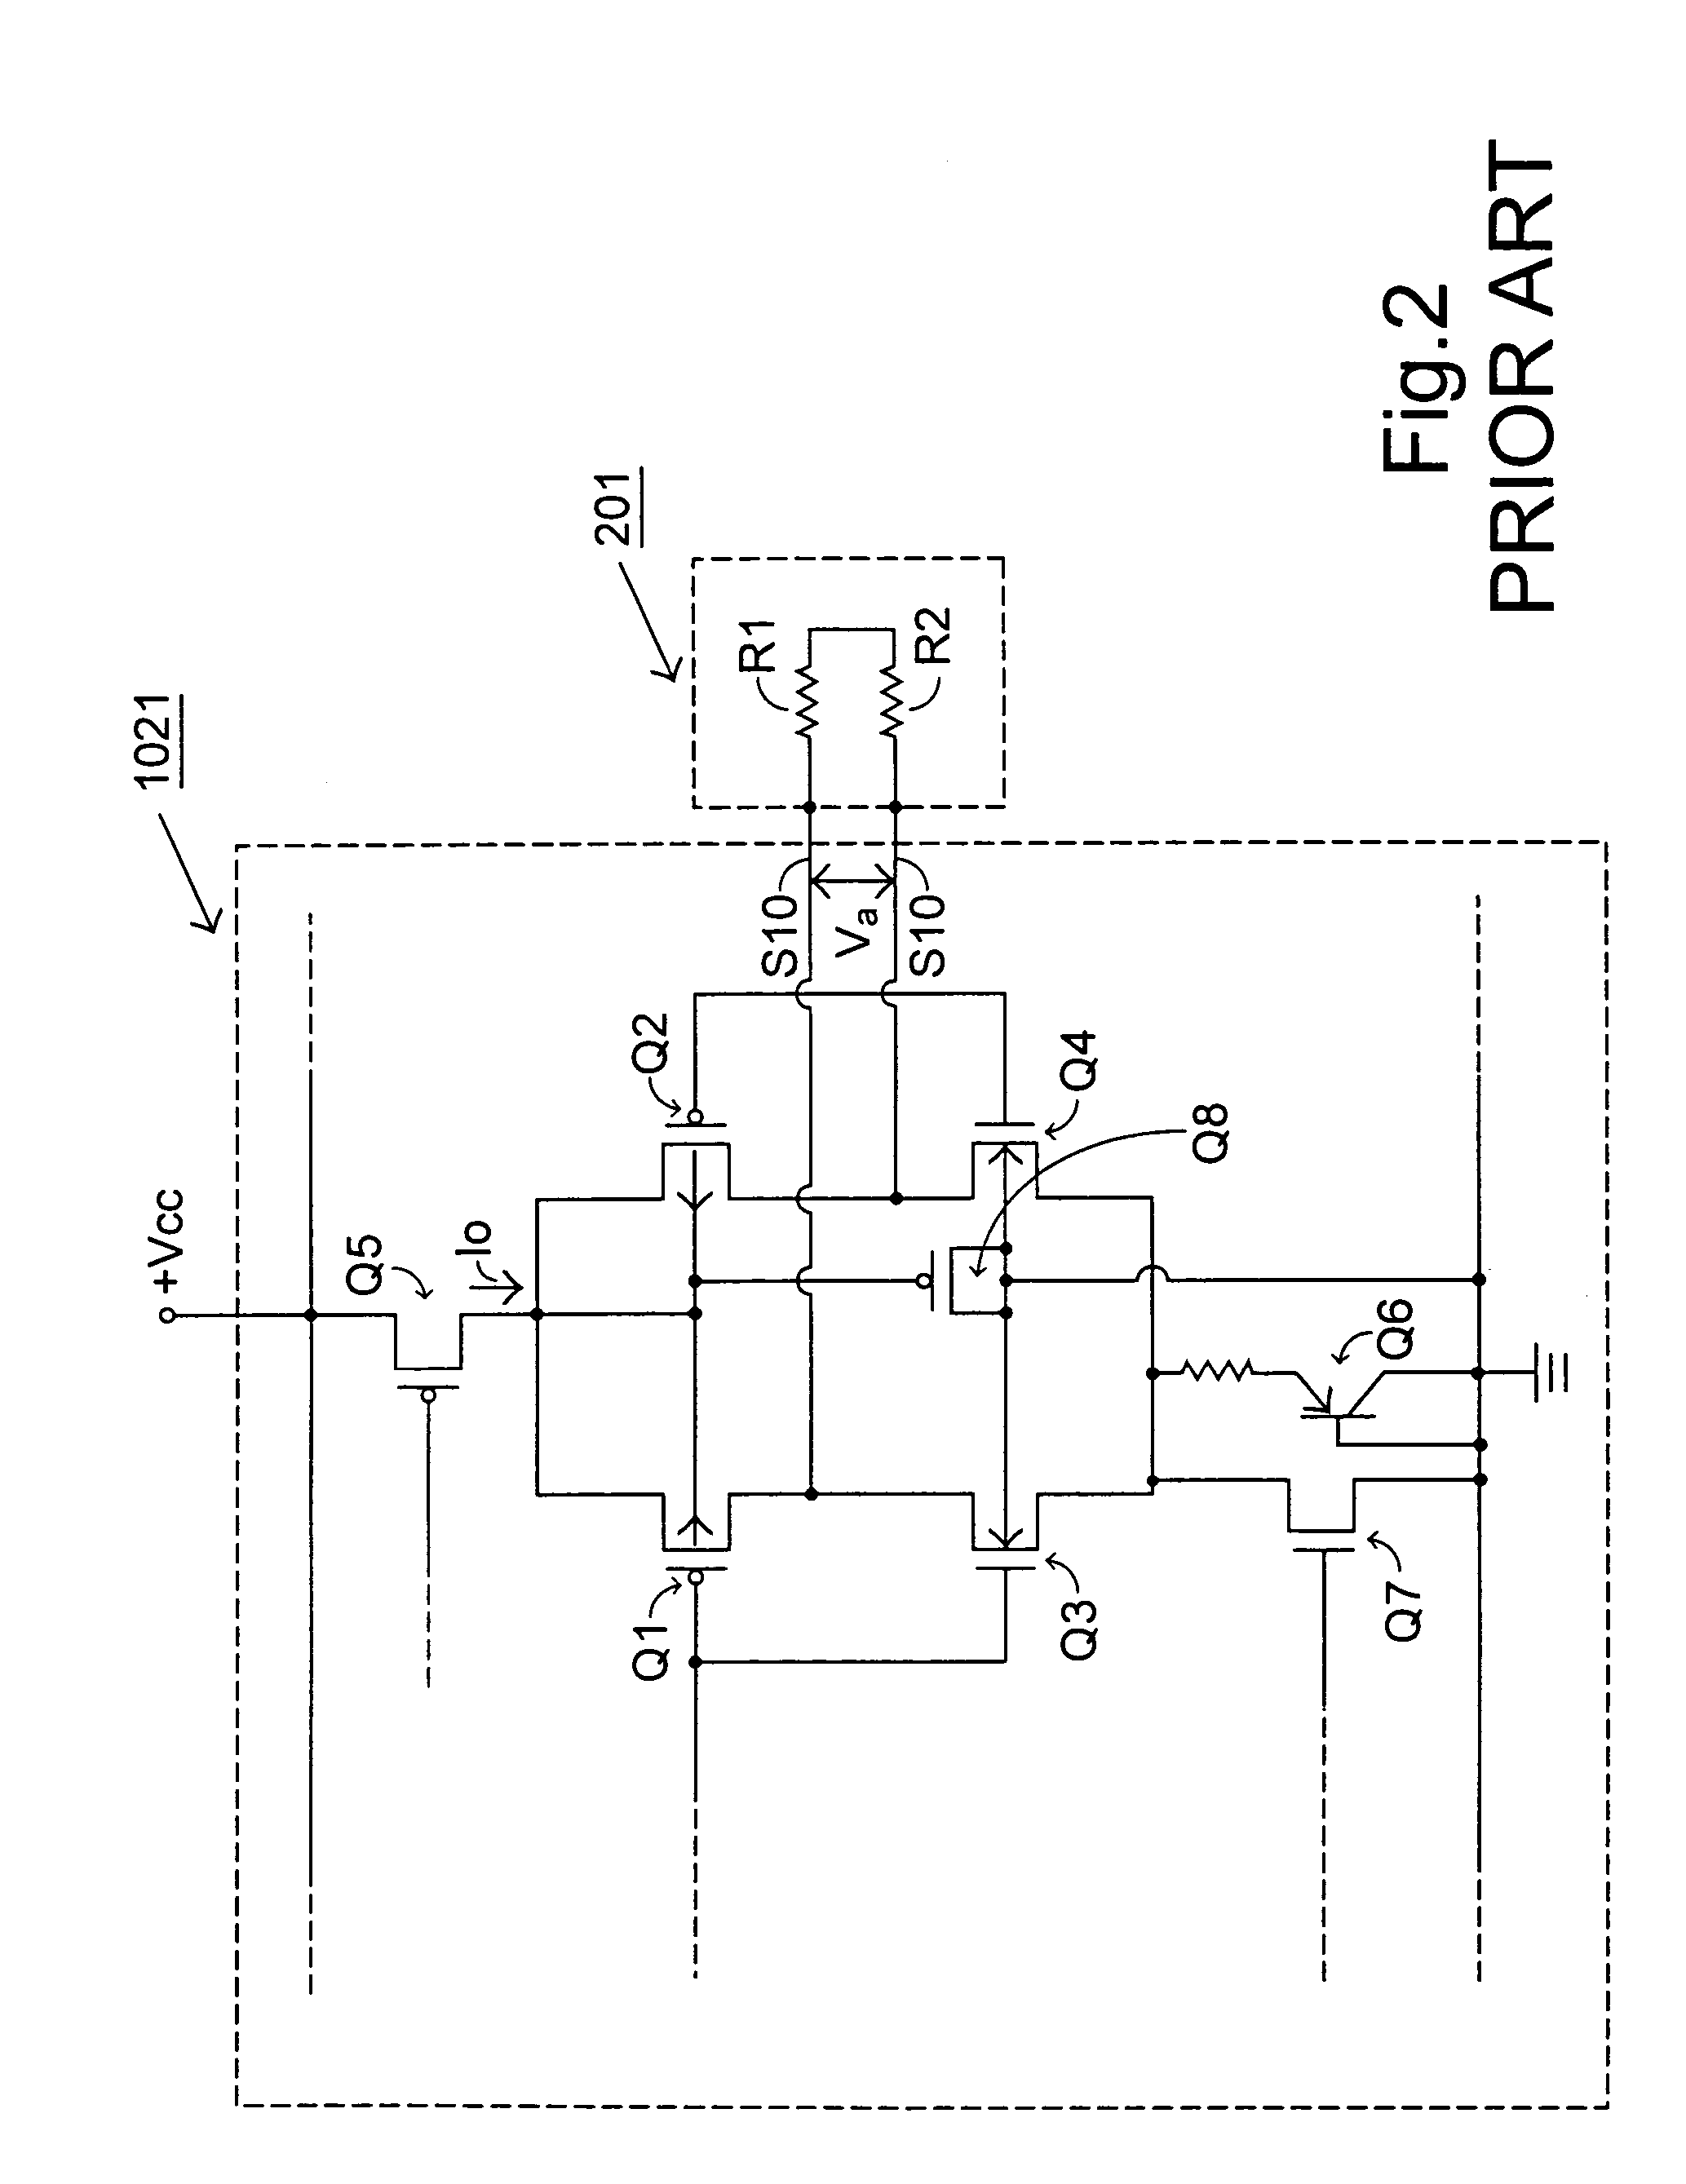 Low voltage differential signaling device with feedback compensation